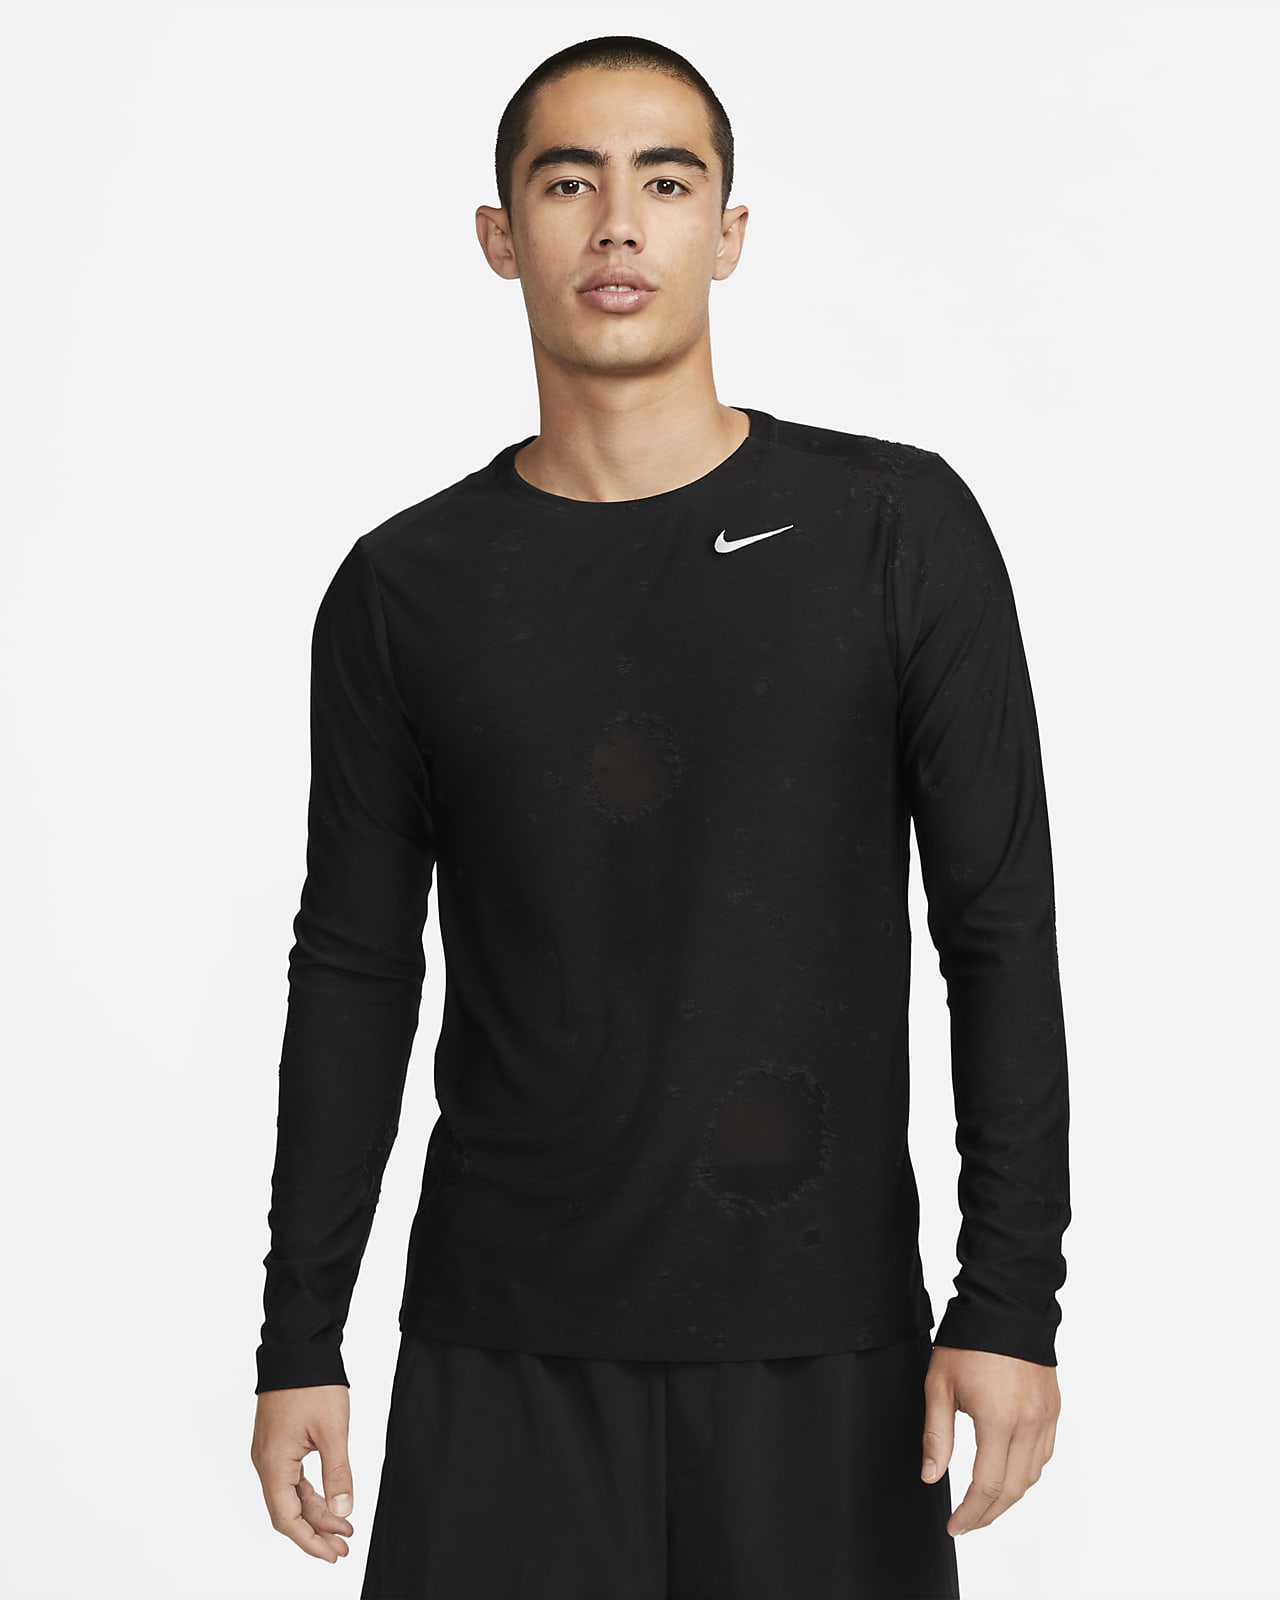 Gastos Martin Luther King Junior salir Nike Dri-FIT Men's Long-sleeve All-over Print Fitness Top. Nike IN